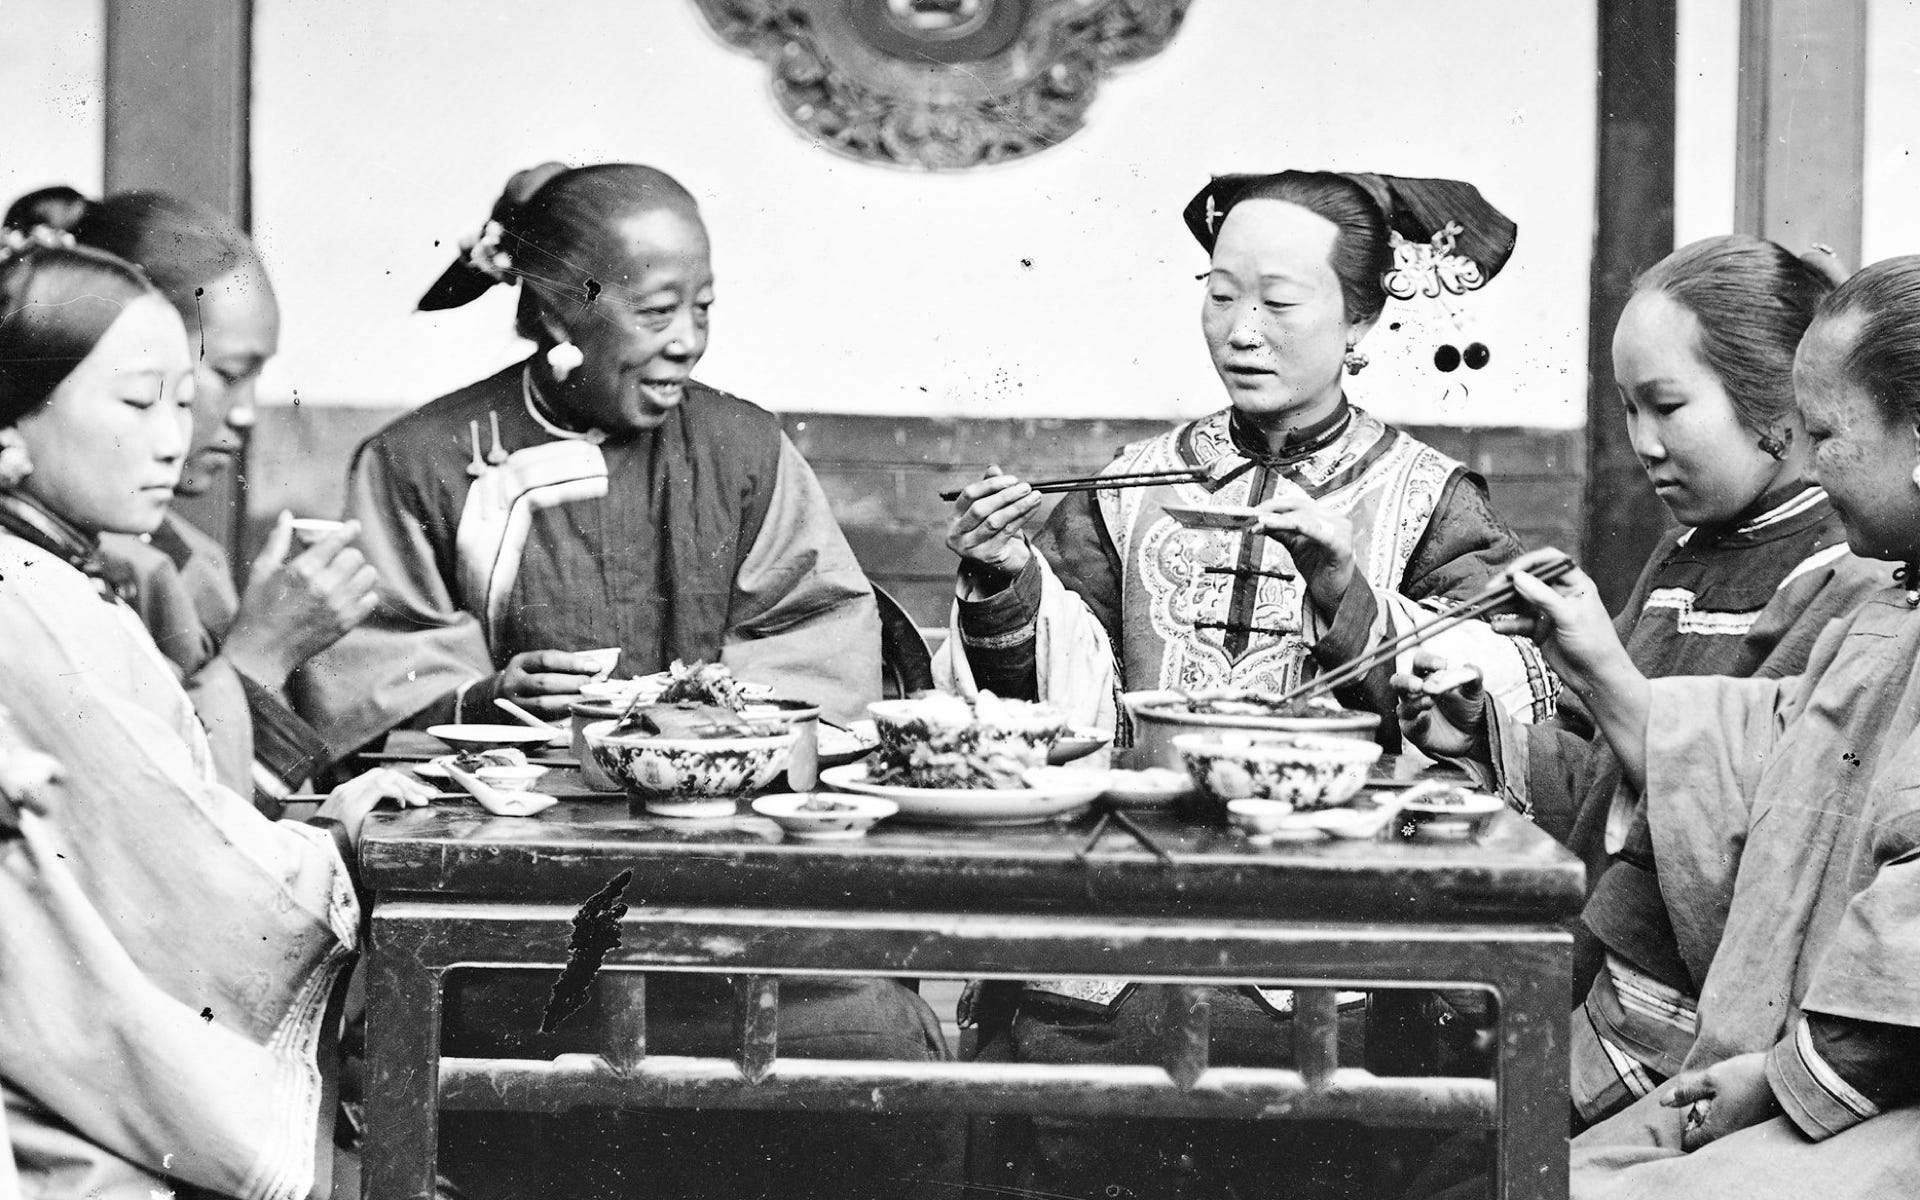 Ancient Chinese Secret These 14 Phenomenal Photos Reveal There Were Indeed Black Chinese by Paco Taylor Medium image